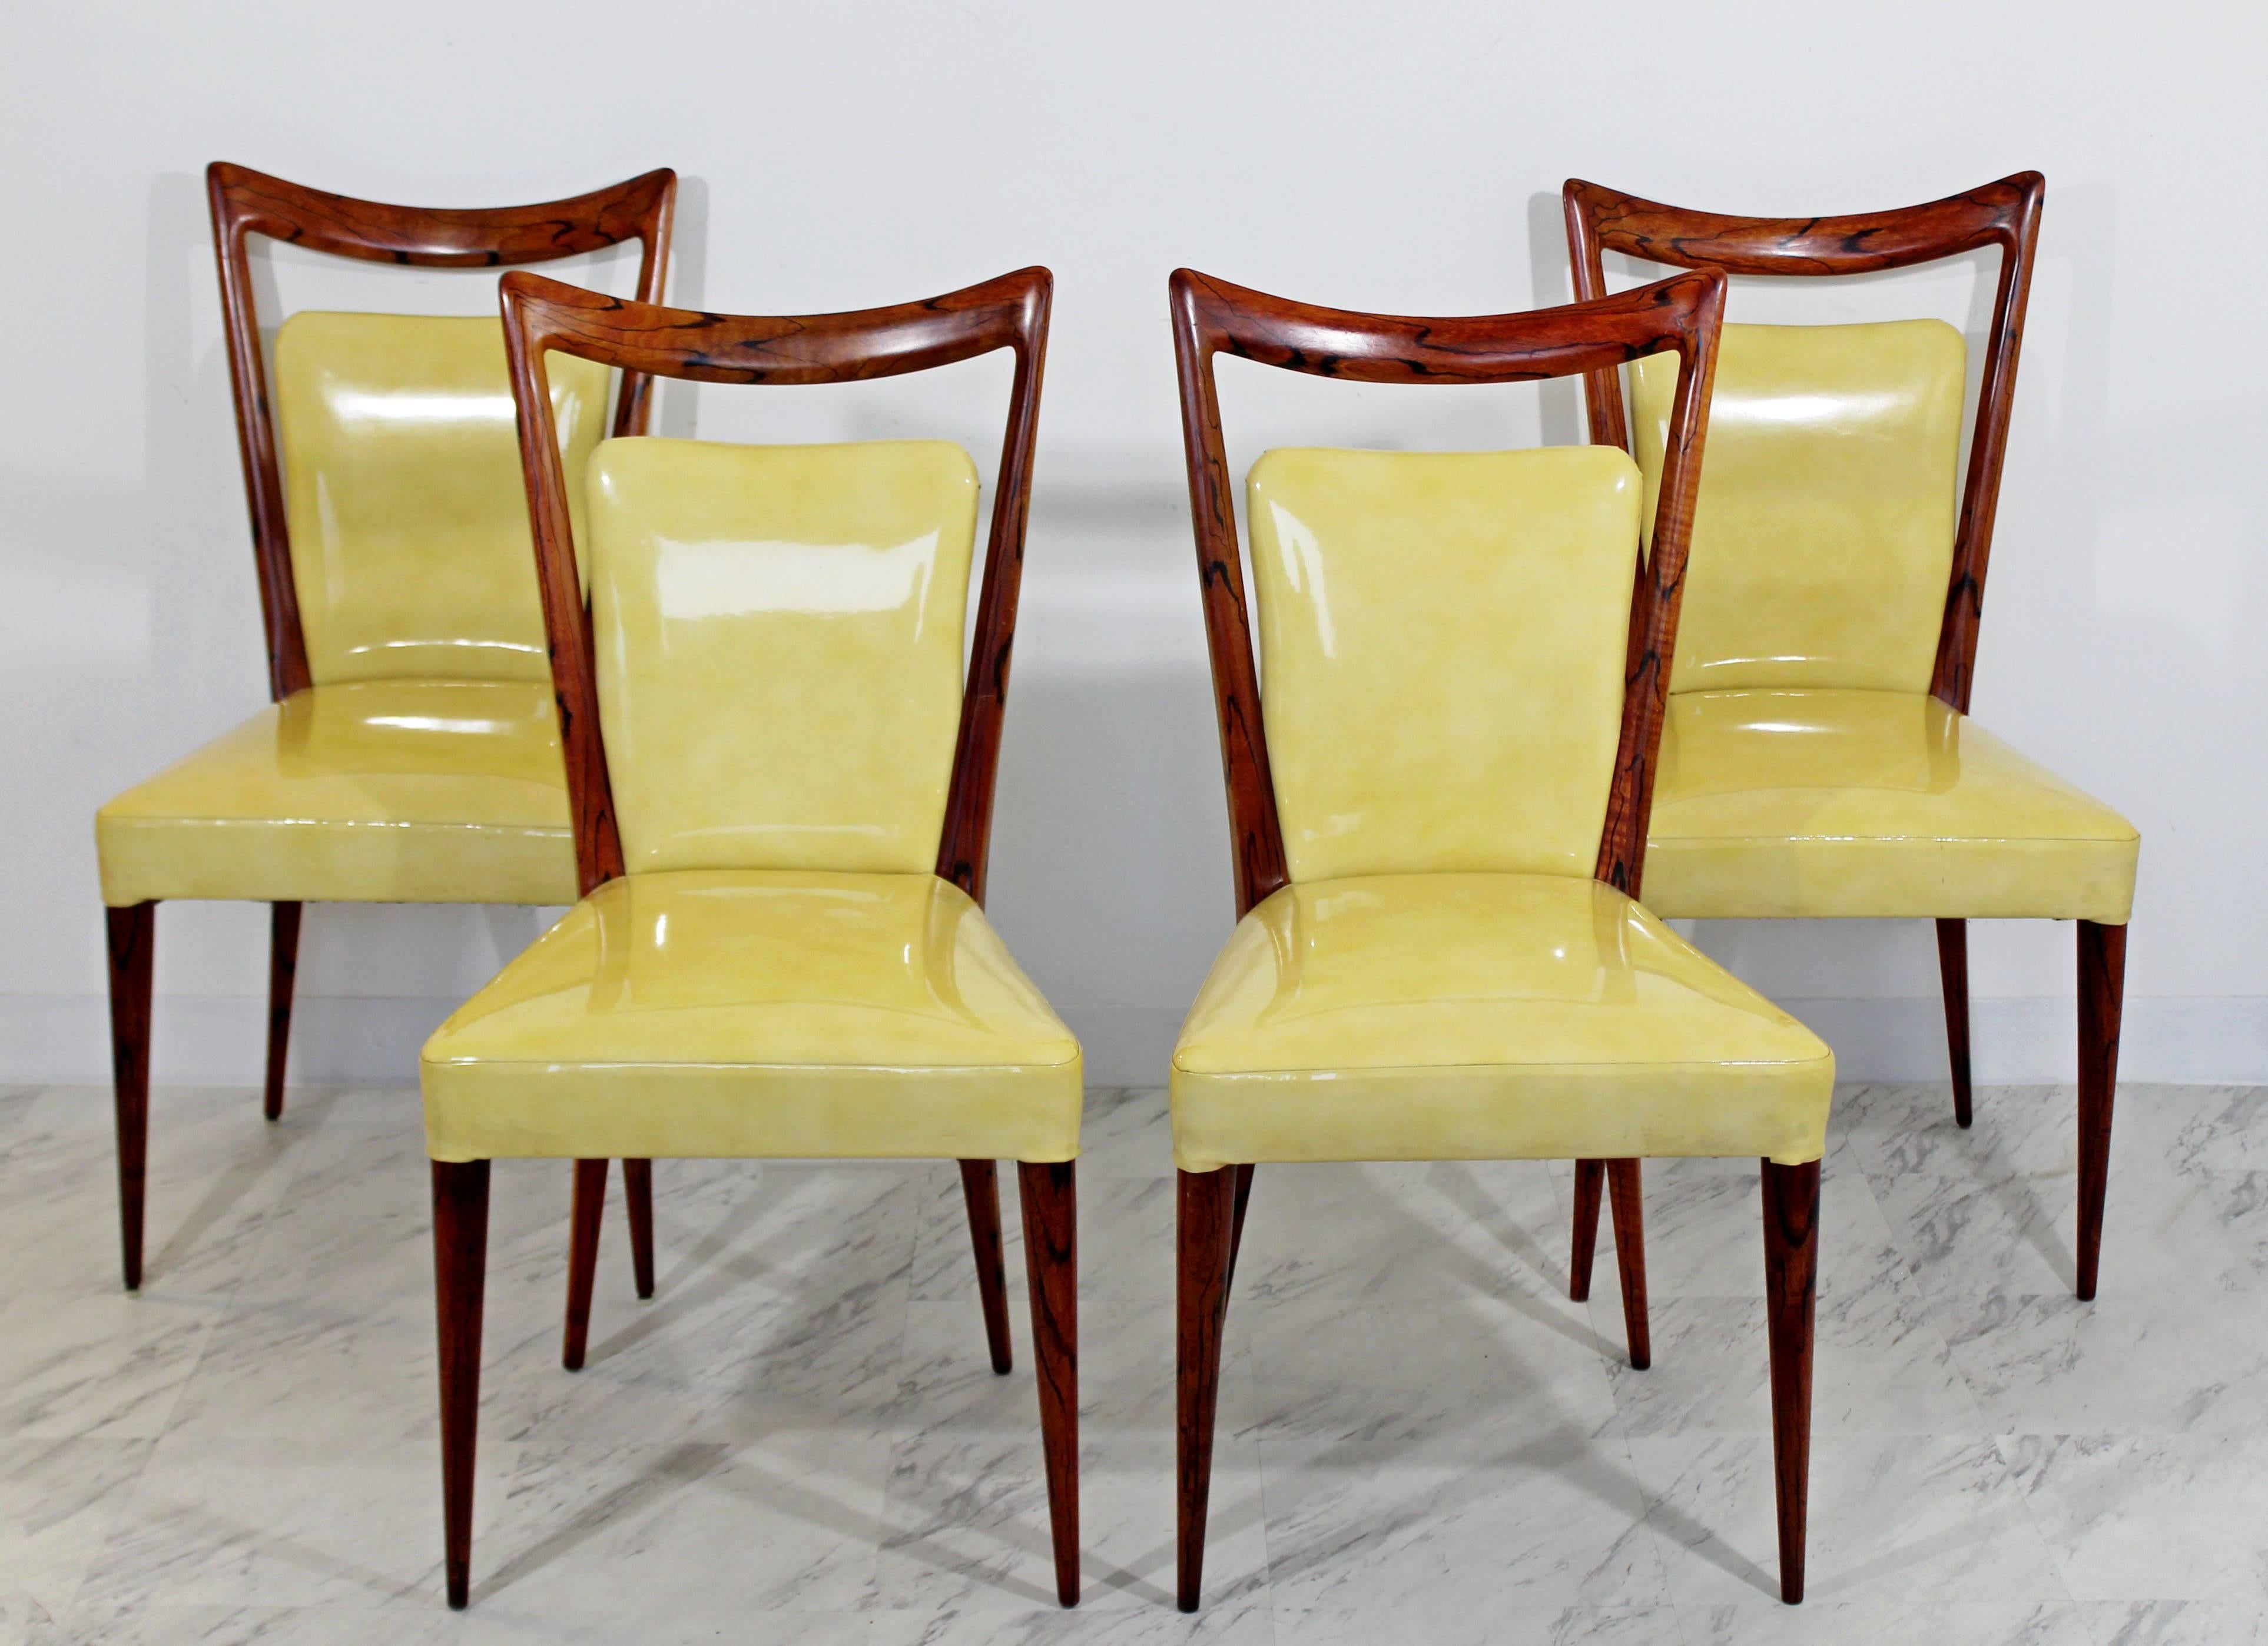 For your consideration is a rare and fabulous, set of four, Italian side dining chairs, made of rosewood and with a high gloss, yellow vinyl upholstery by Melchiorre Bega, circa 1950s.In excellent condition. The dimensions are 19